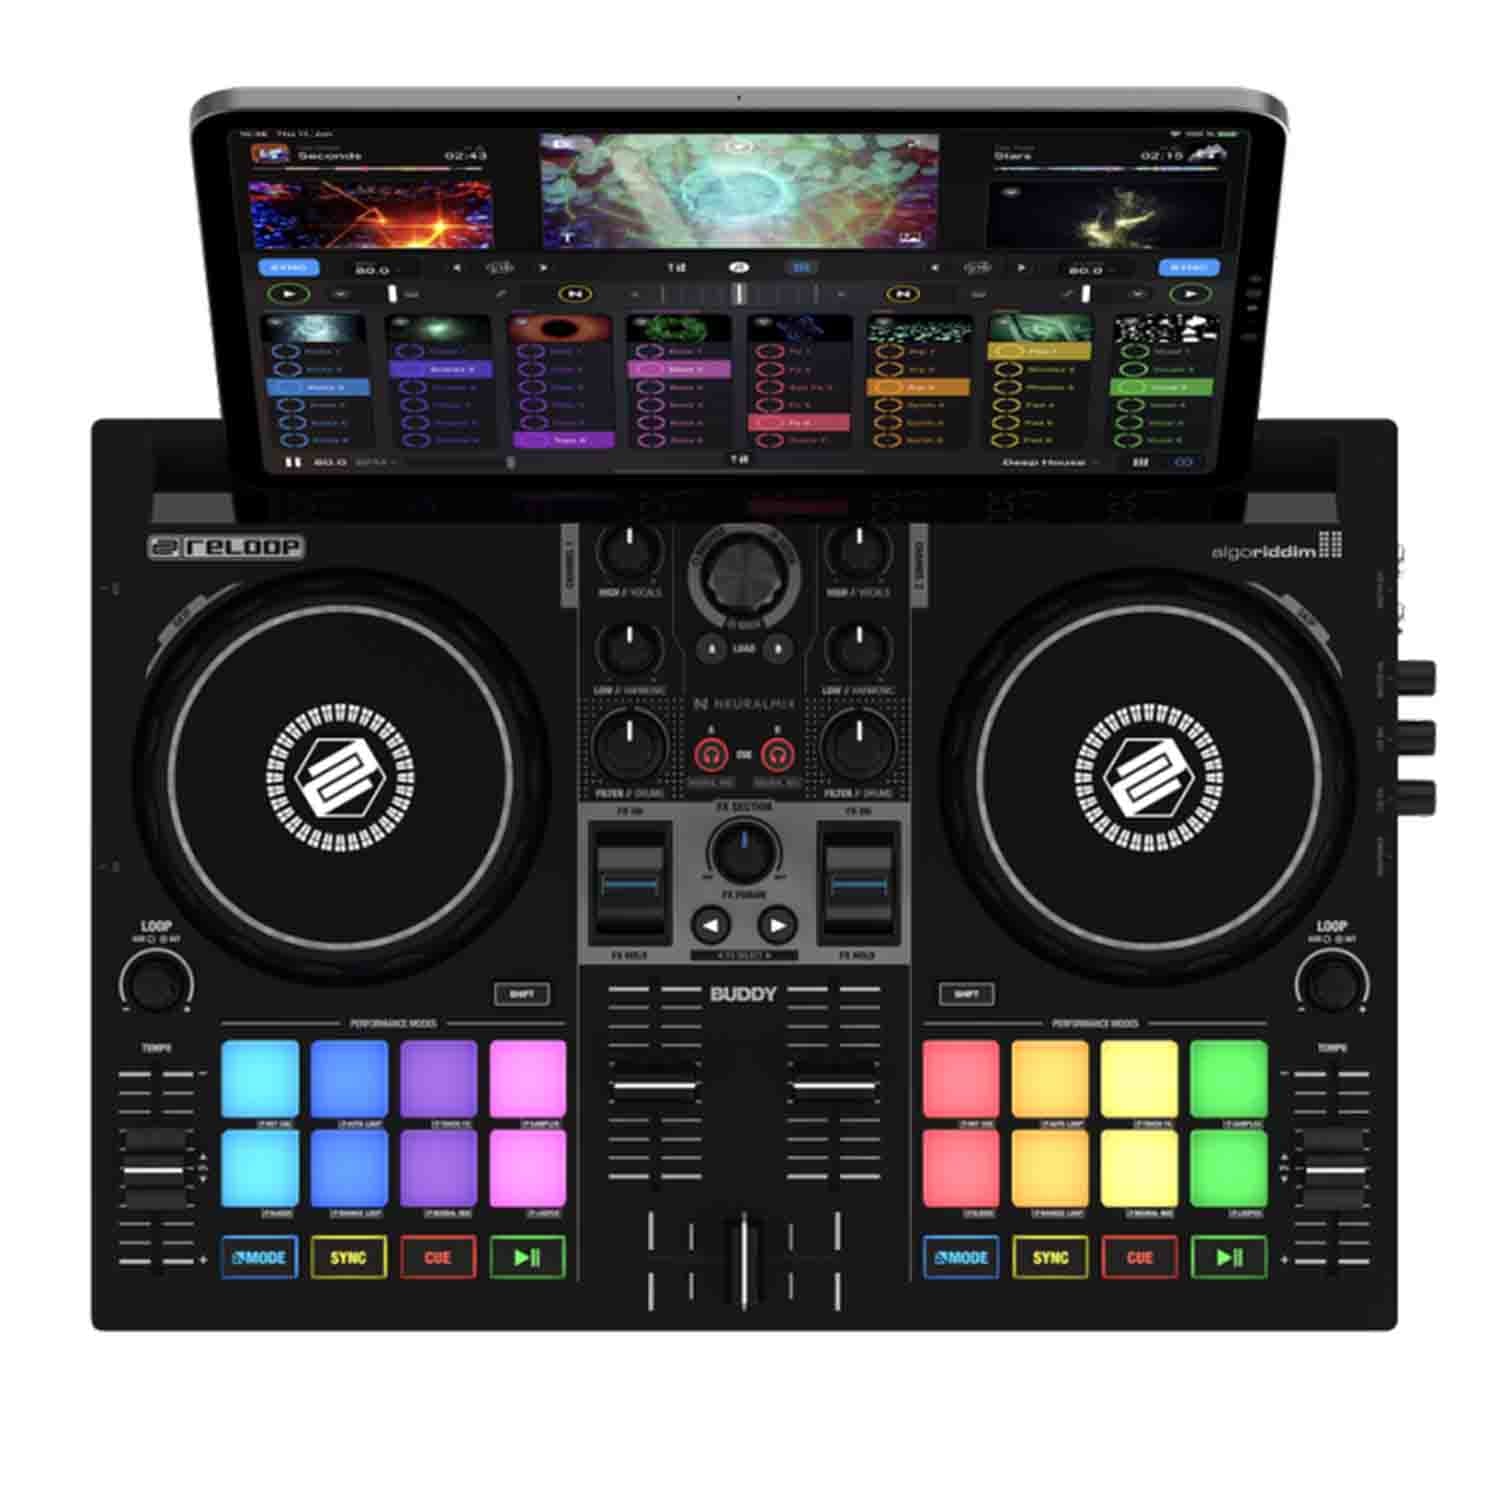 B-Stock: Reloop BUDDY Compact 2-Channel DJ Controller for iOS/iPAD, Android Mac and Pc - Hollywood DJ